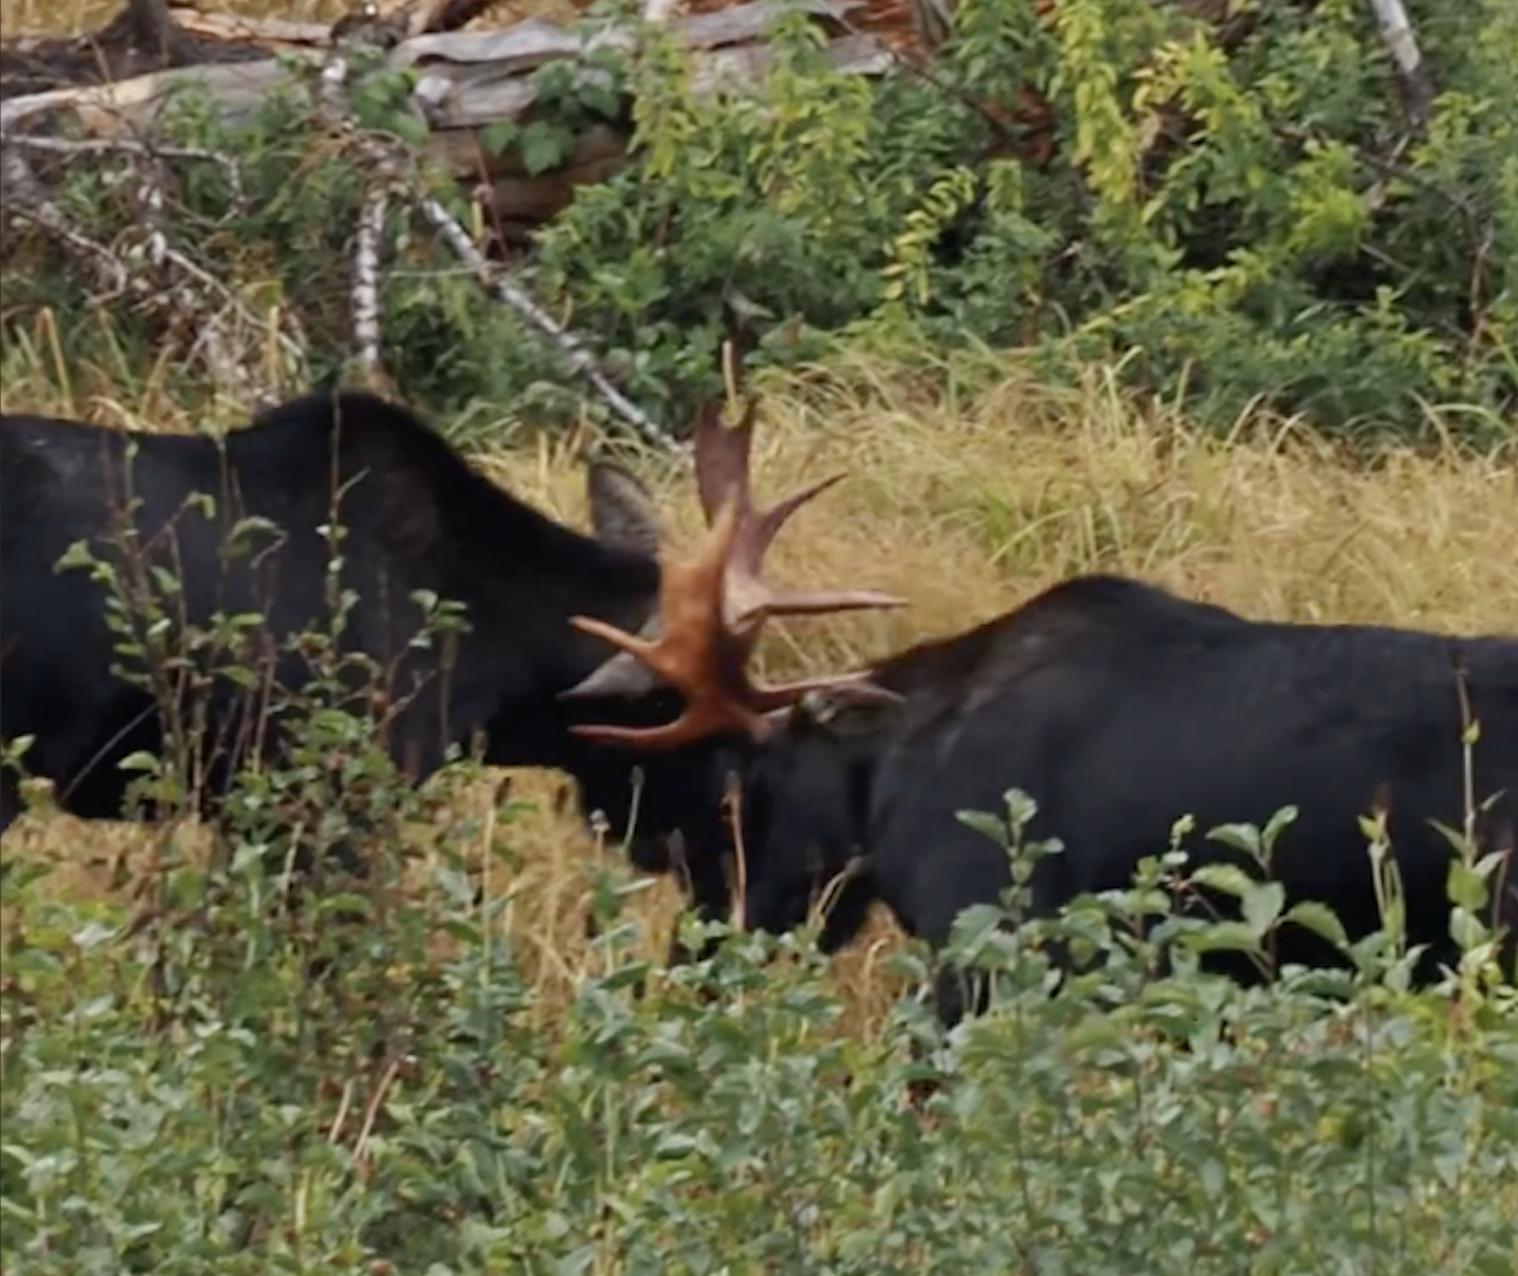 WATCH: Two Bull Moose Battle While Elk Observes From A Distance